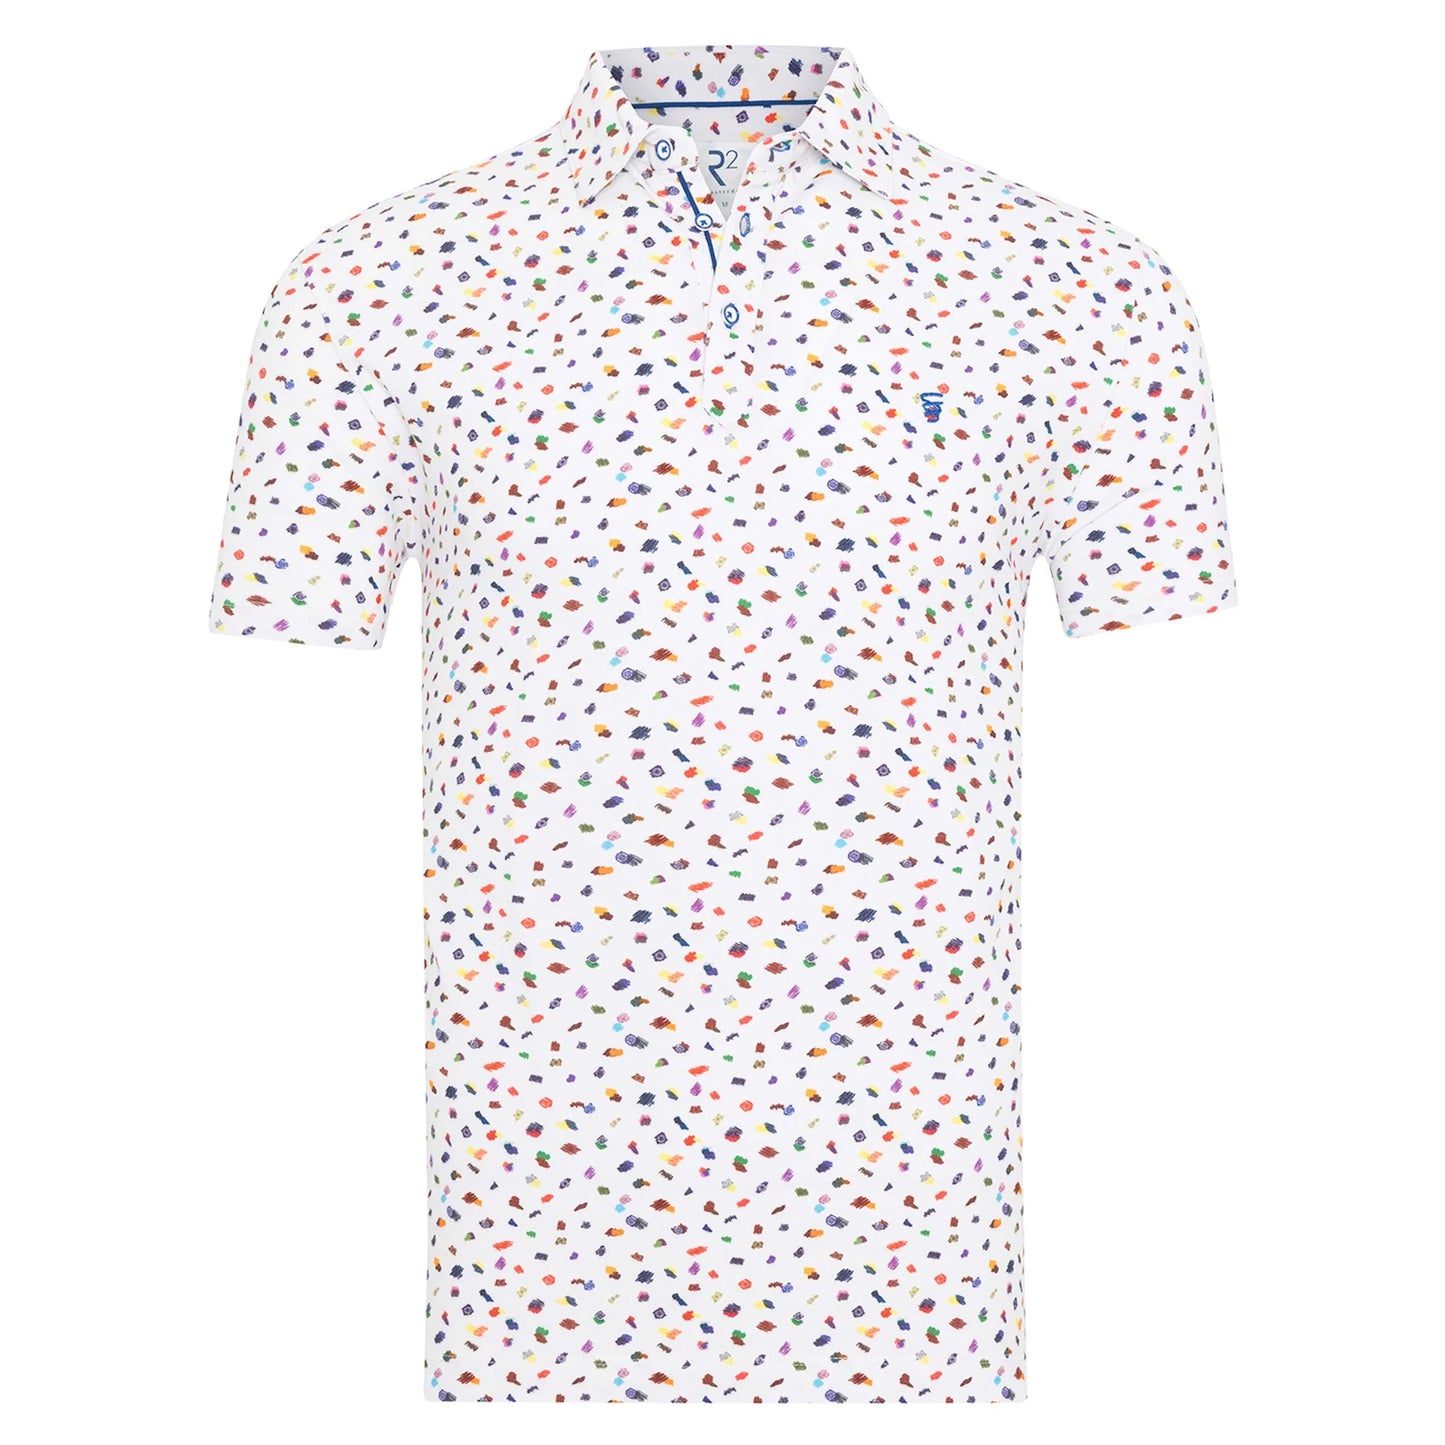 Squiggles polo in multicolour by R2